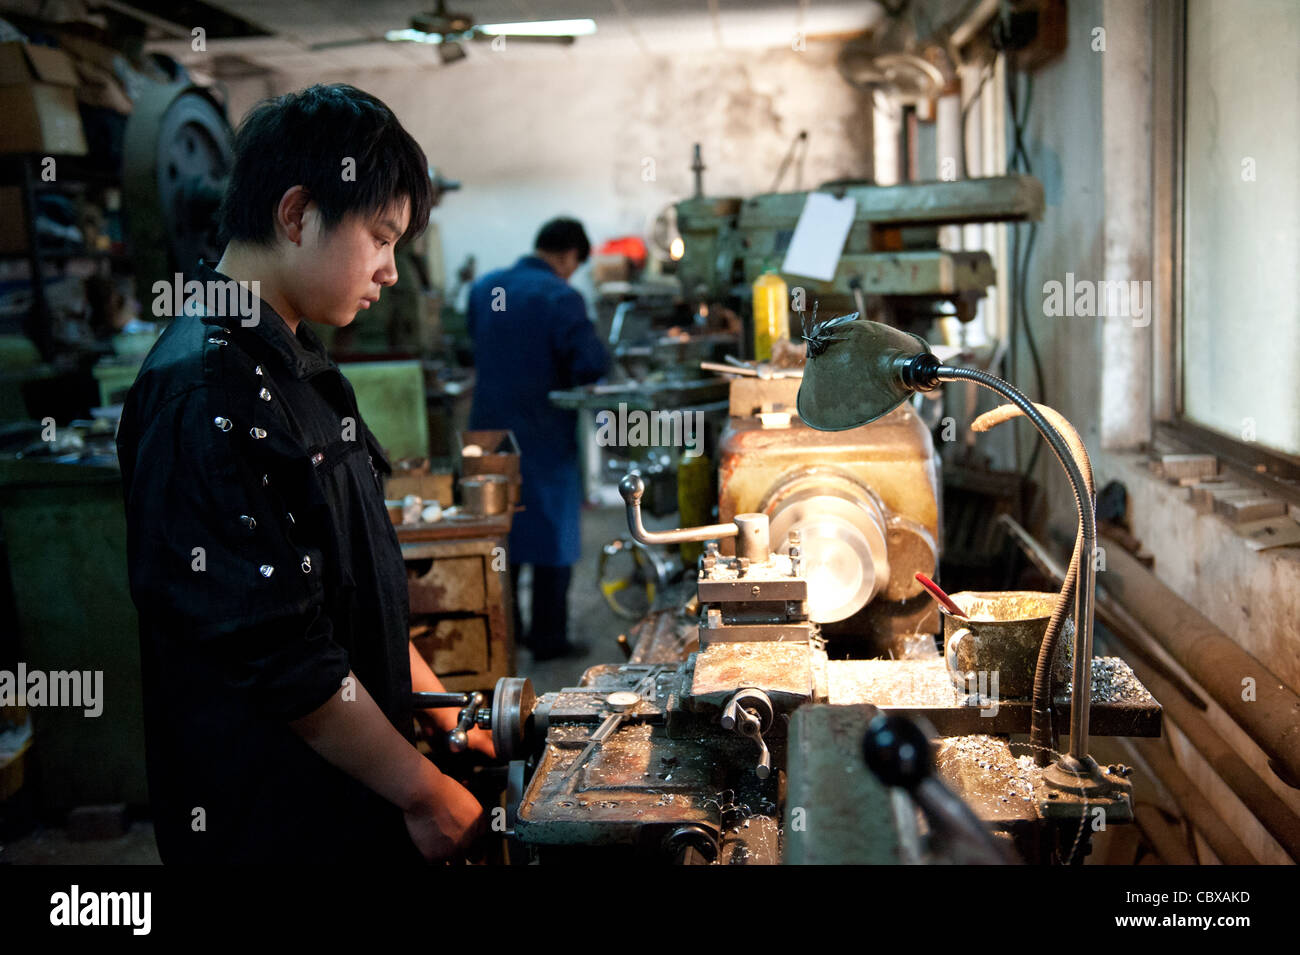 Workers in a metallurgy workshop Stock Photo